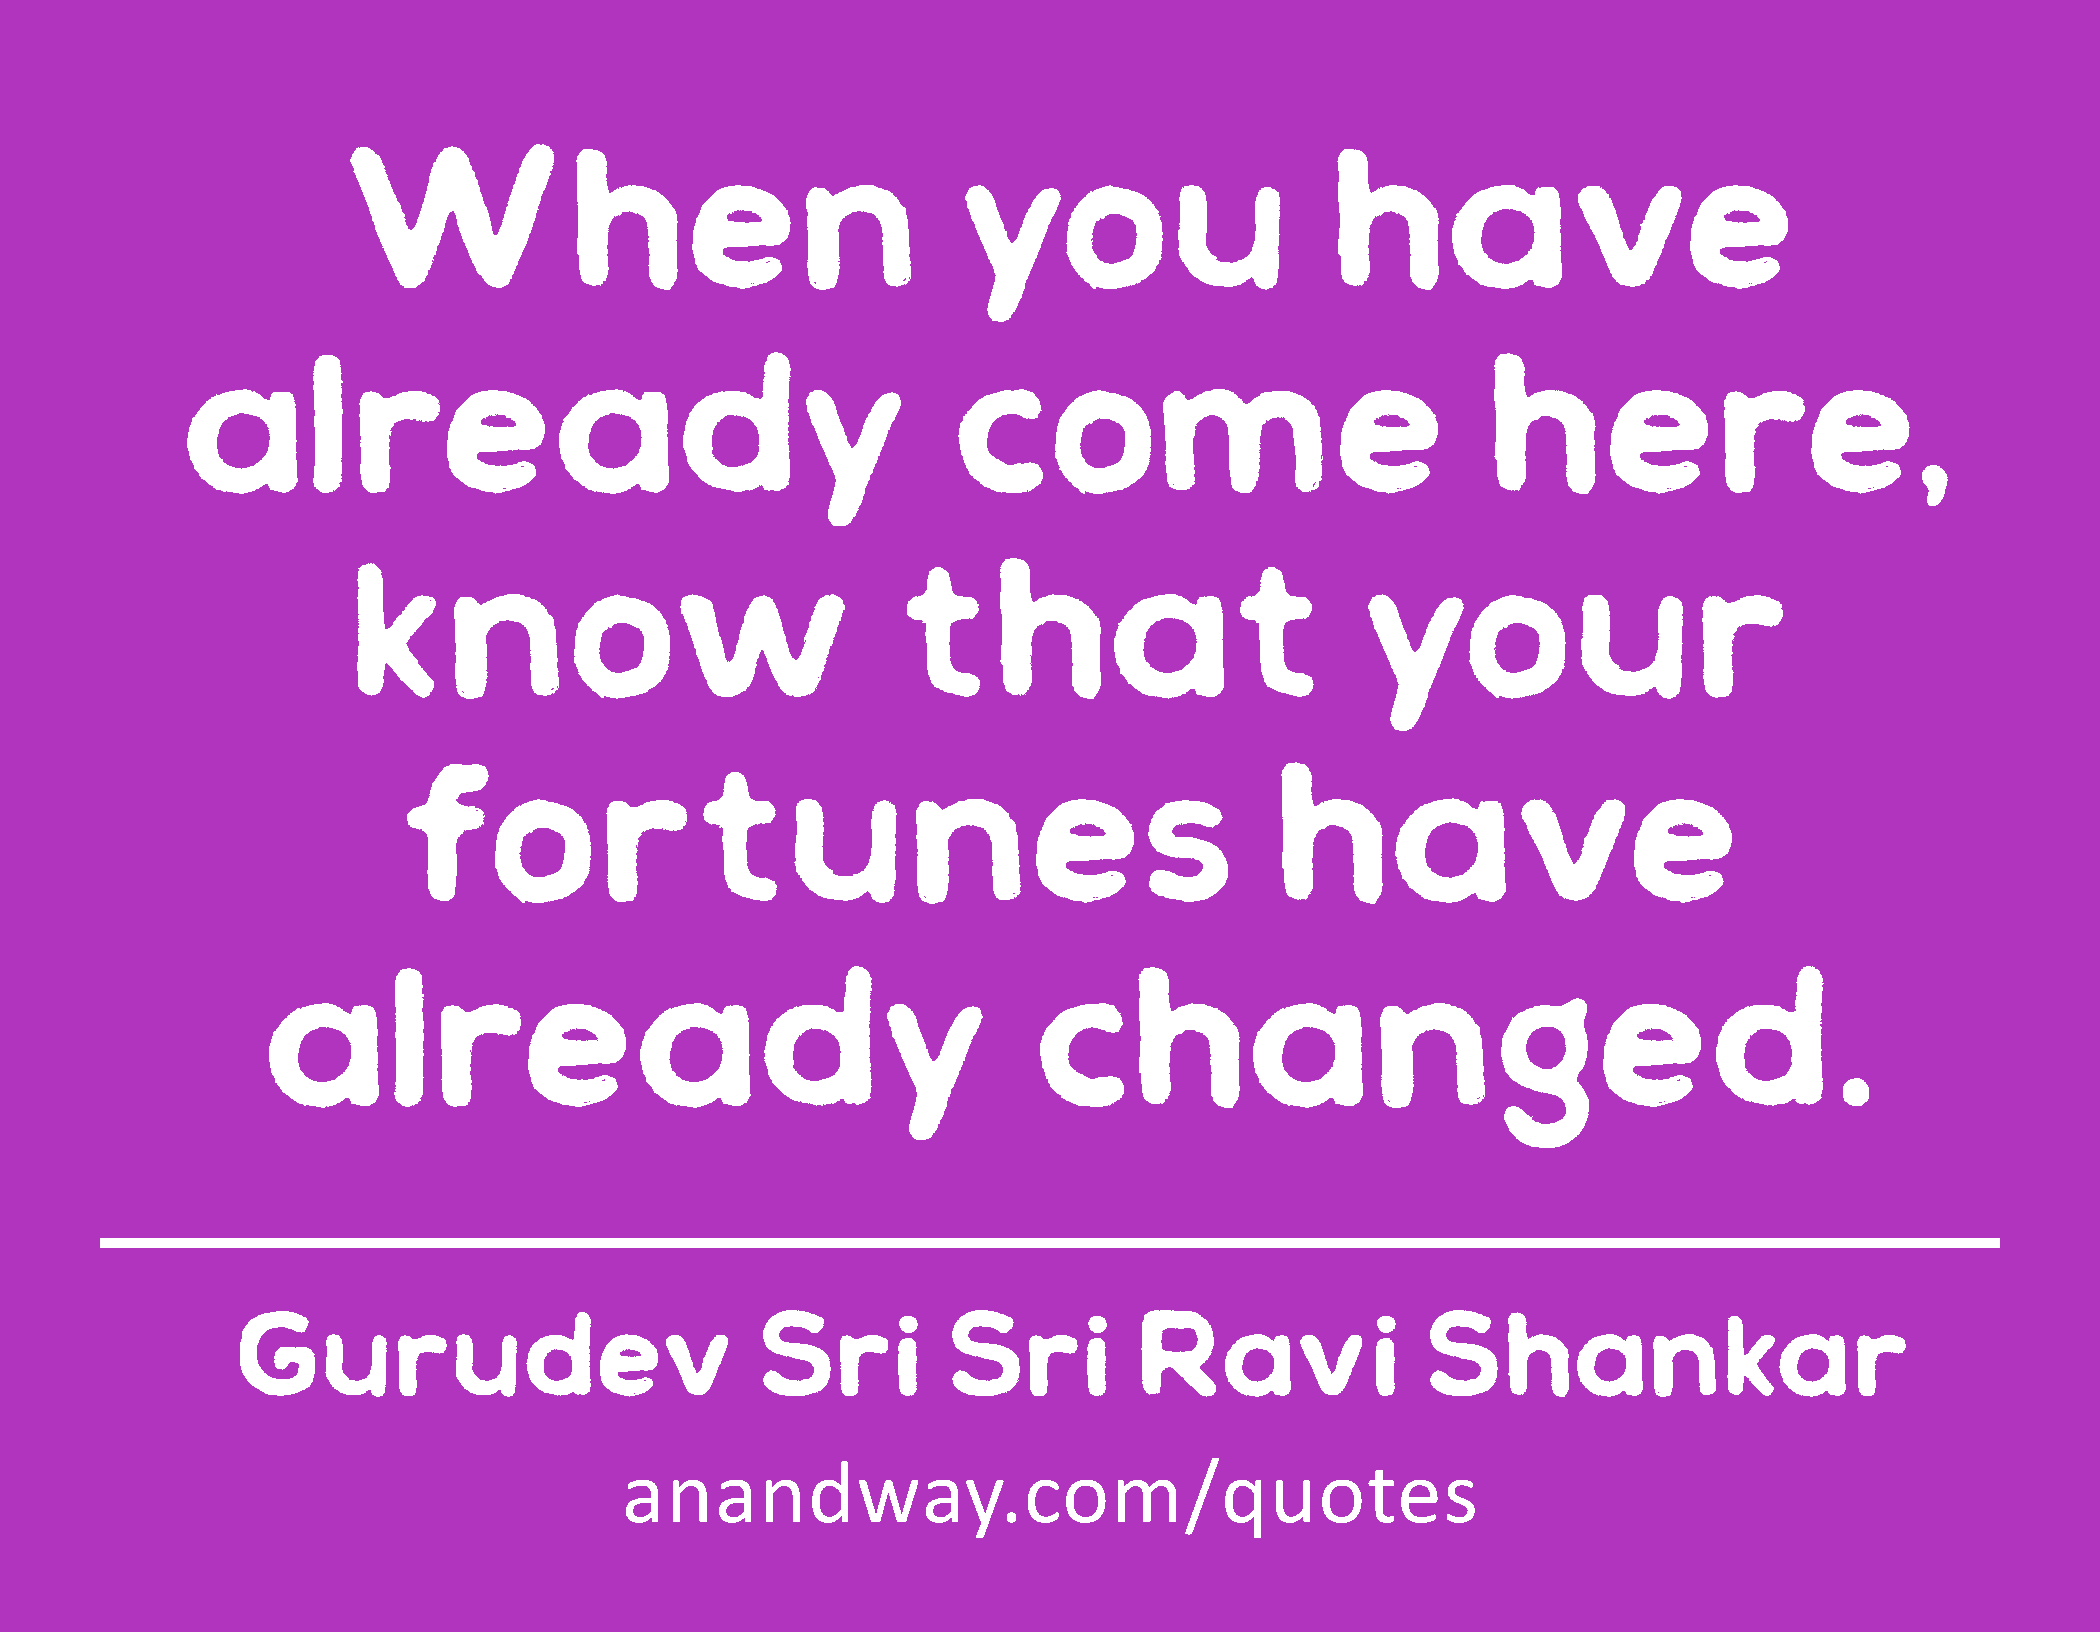 When you have already come here, know that your fortunes have already changed. 
 -Gurudev Sri Sri Ravi Shankar